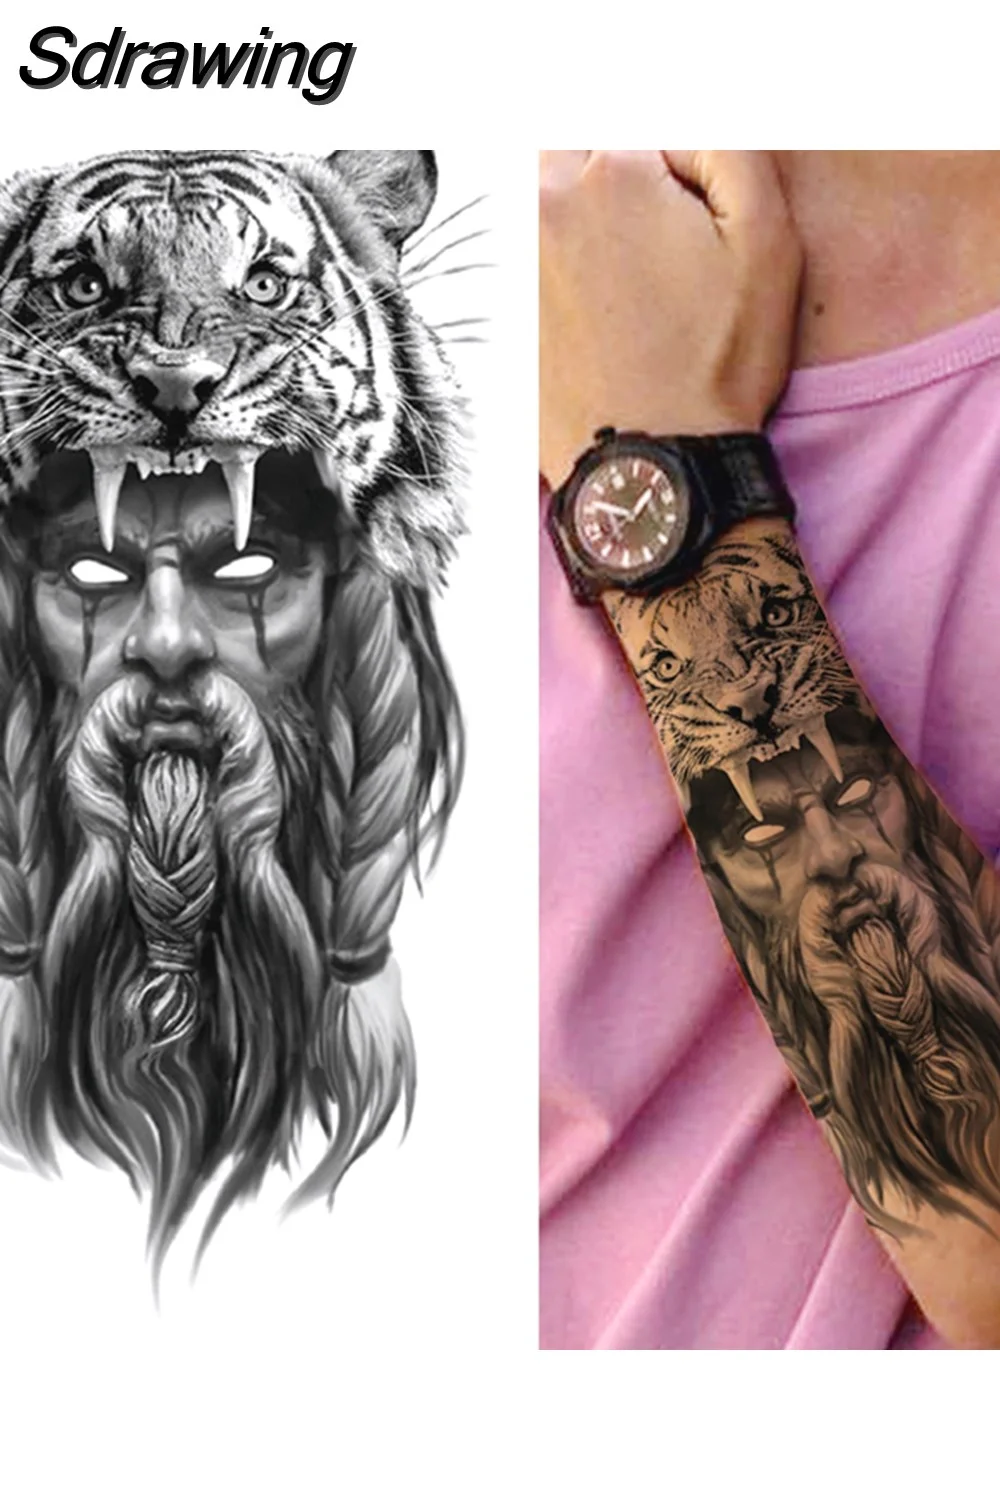 Sdrawing Lion Temporary Tattoo For Women Men Adult Skull Tiger Wolf Forest Tattoo Sticker Black Fake Realistic Demon Tatoos Forearm 507-0